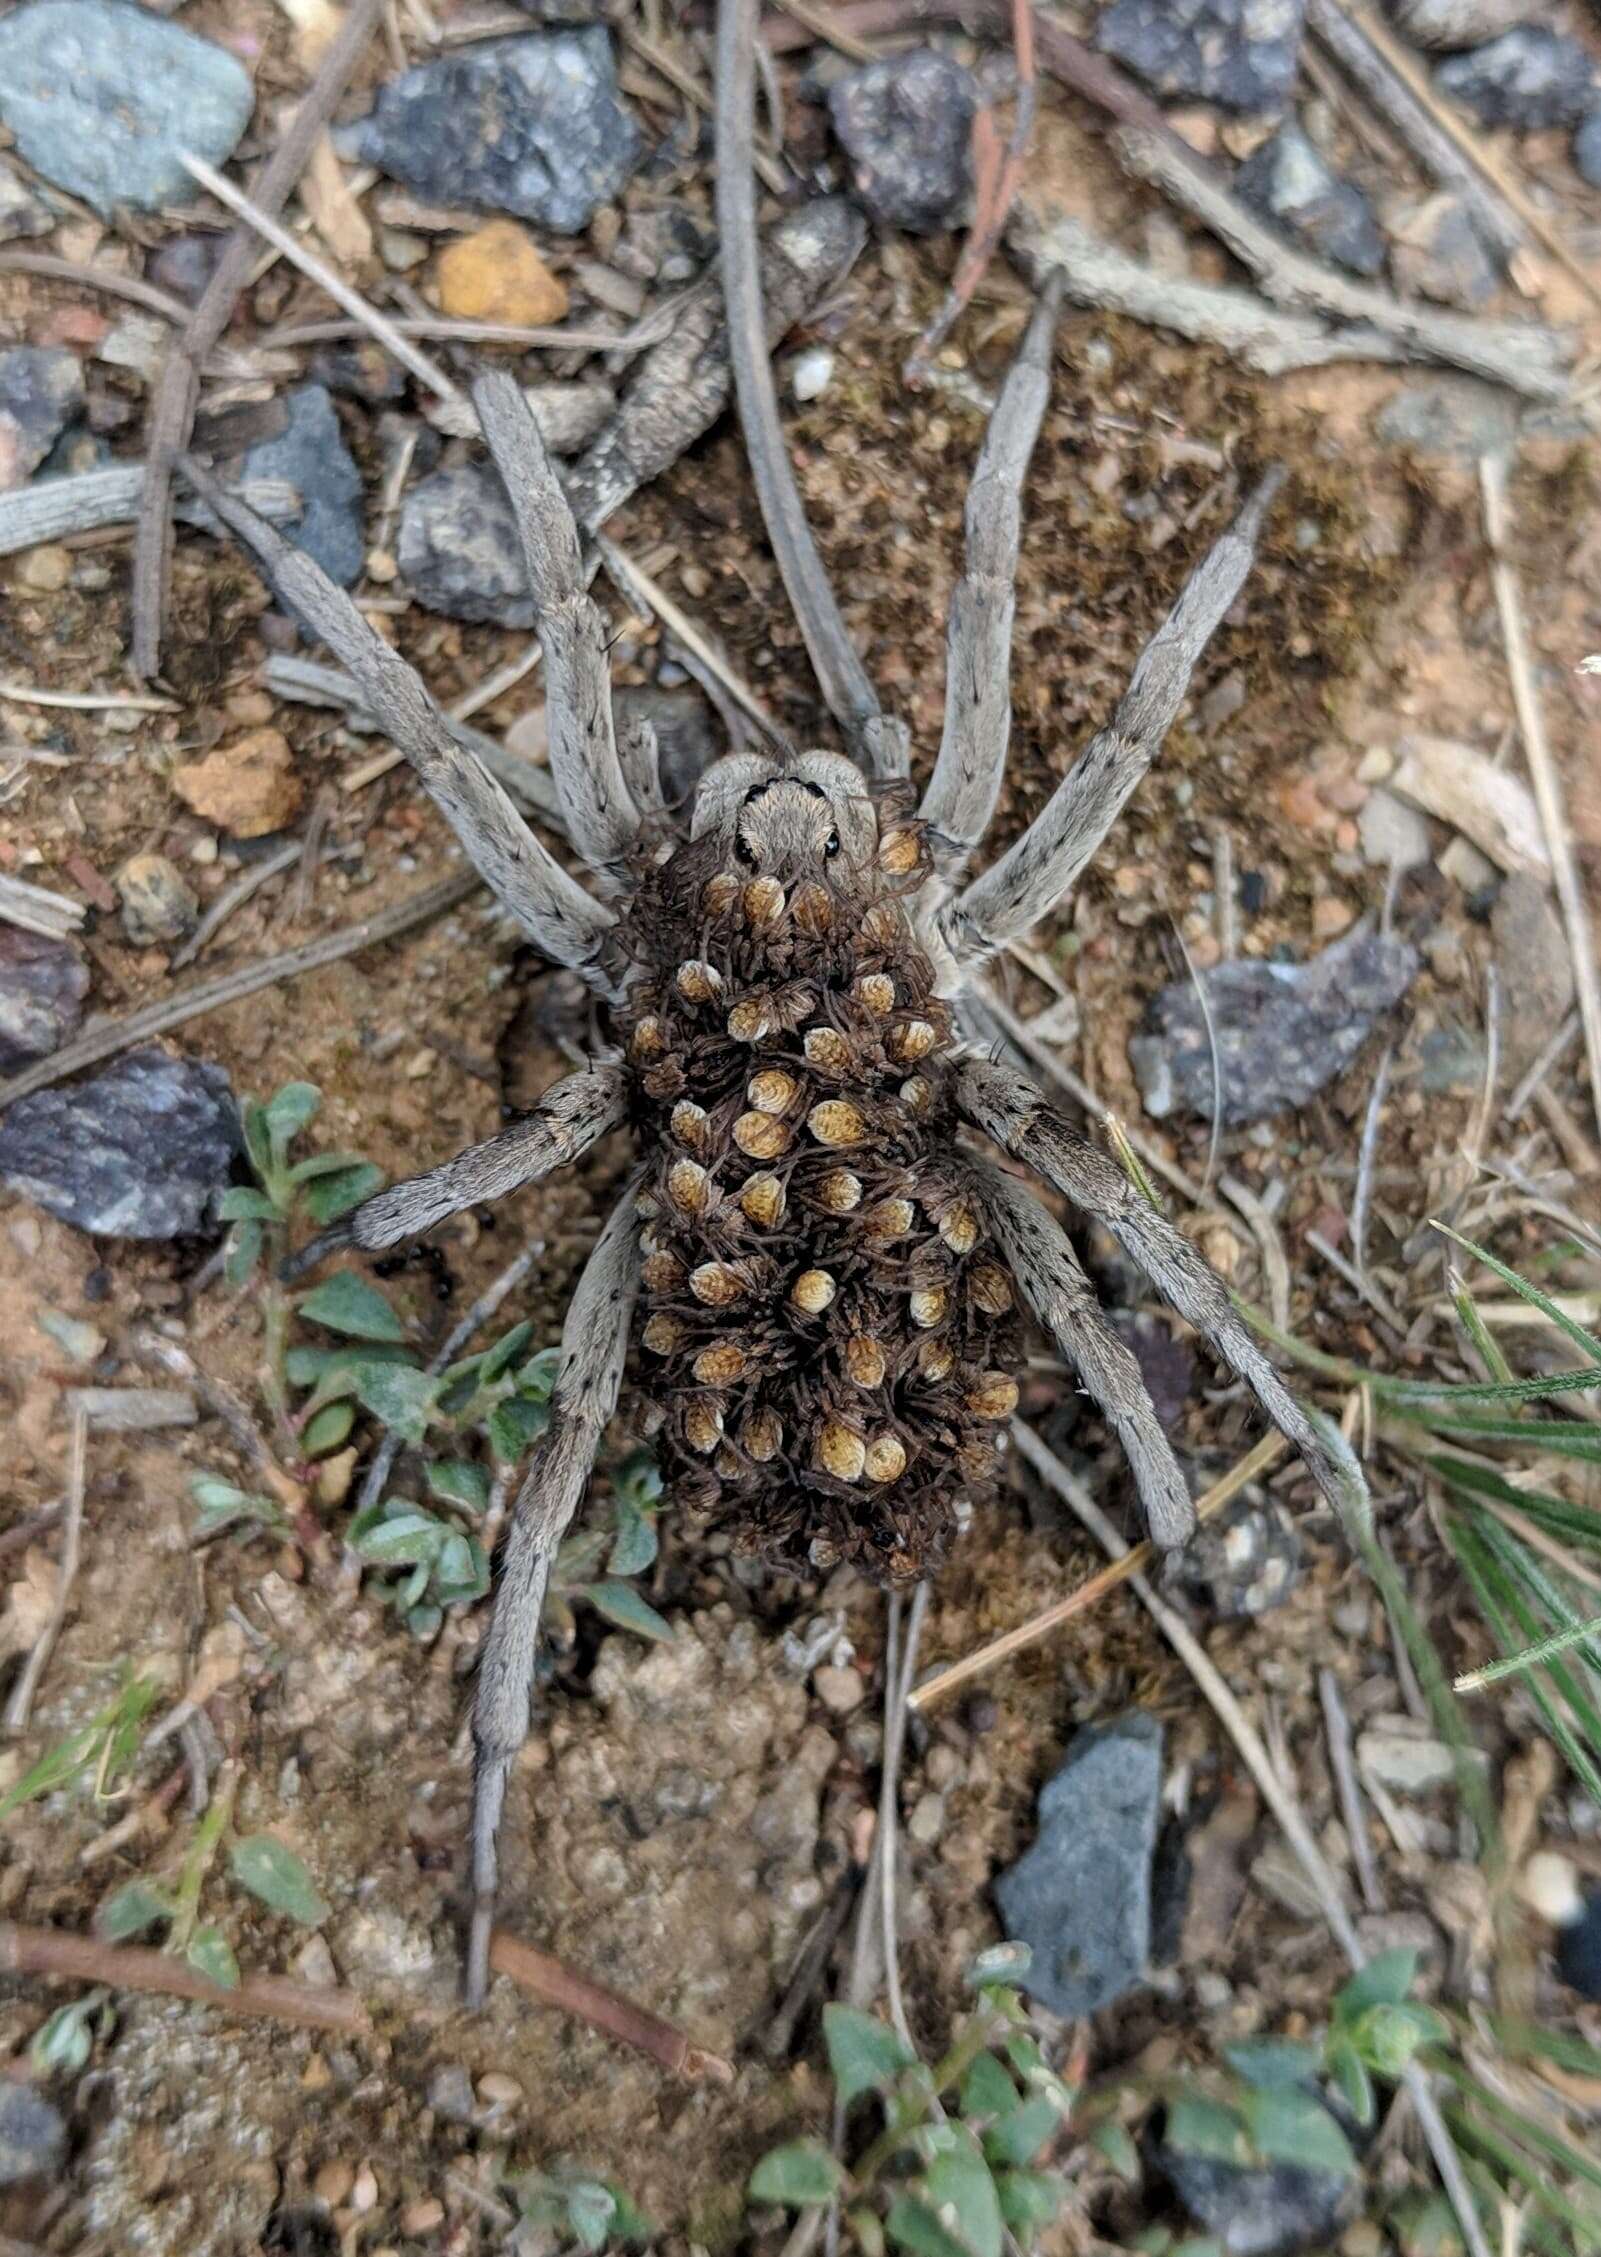 Wolf spider spotted with dozens of babies on her back